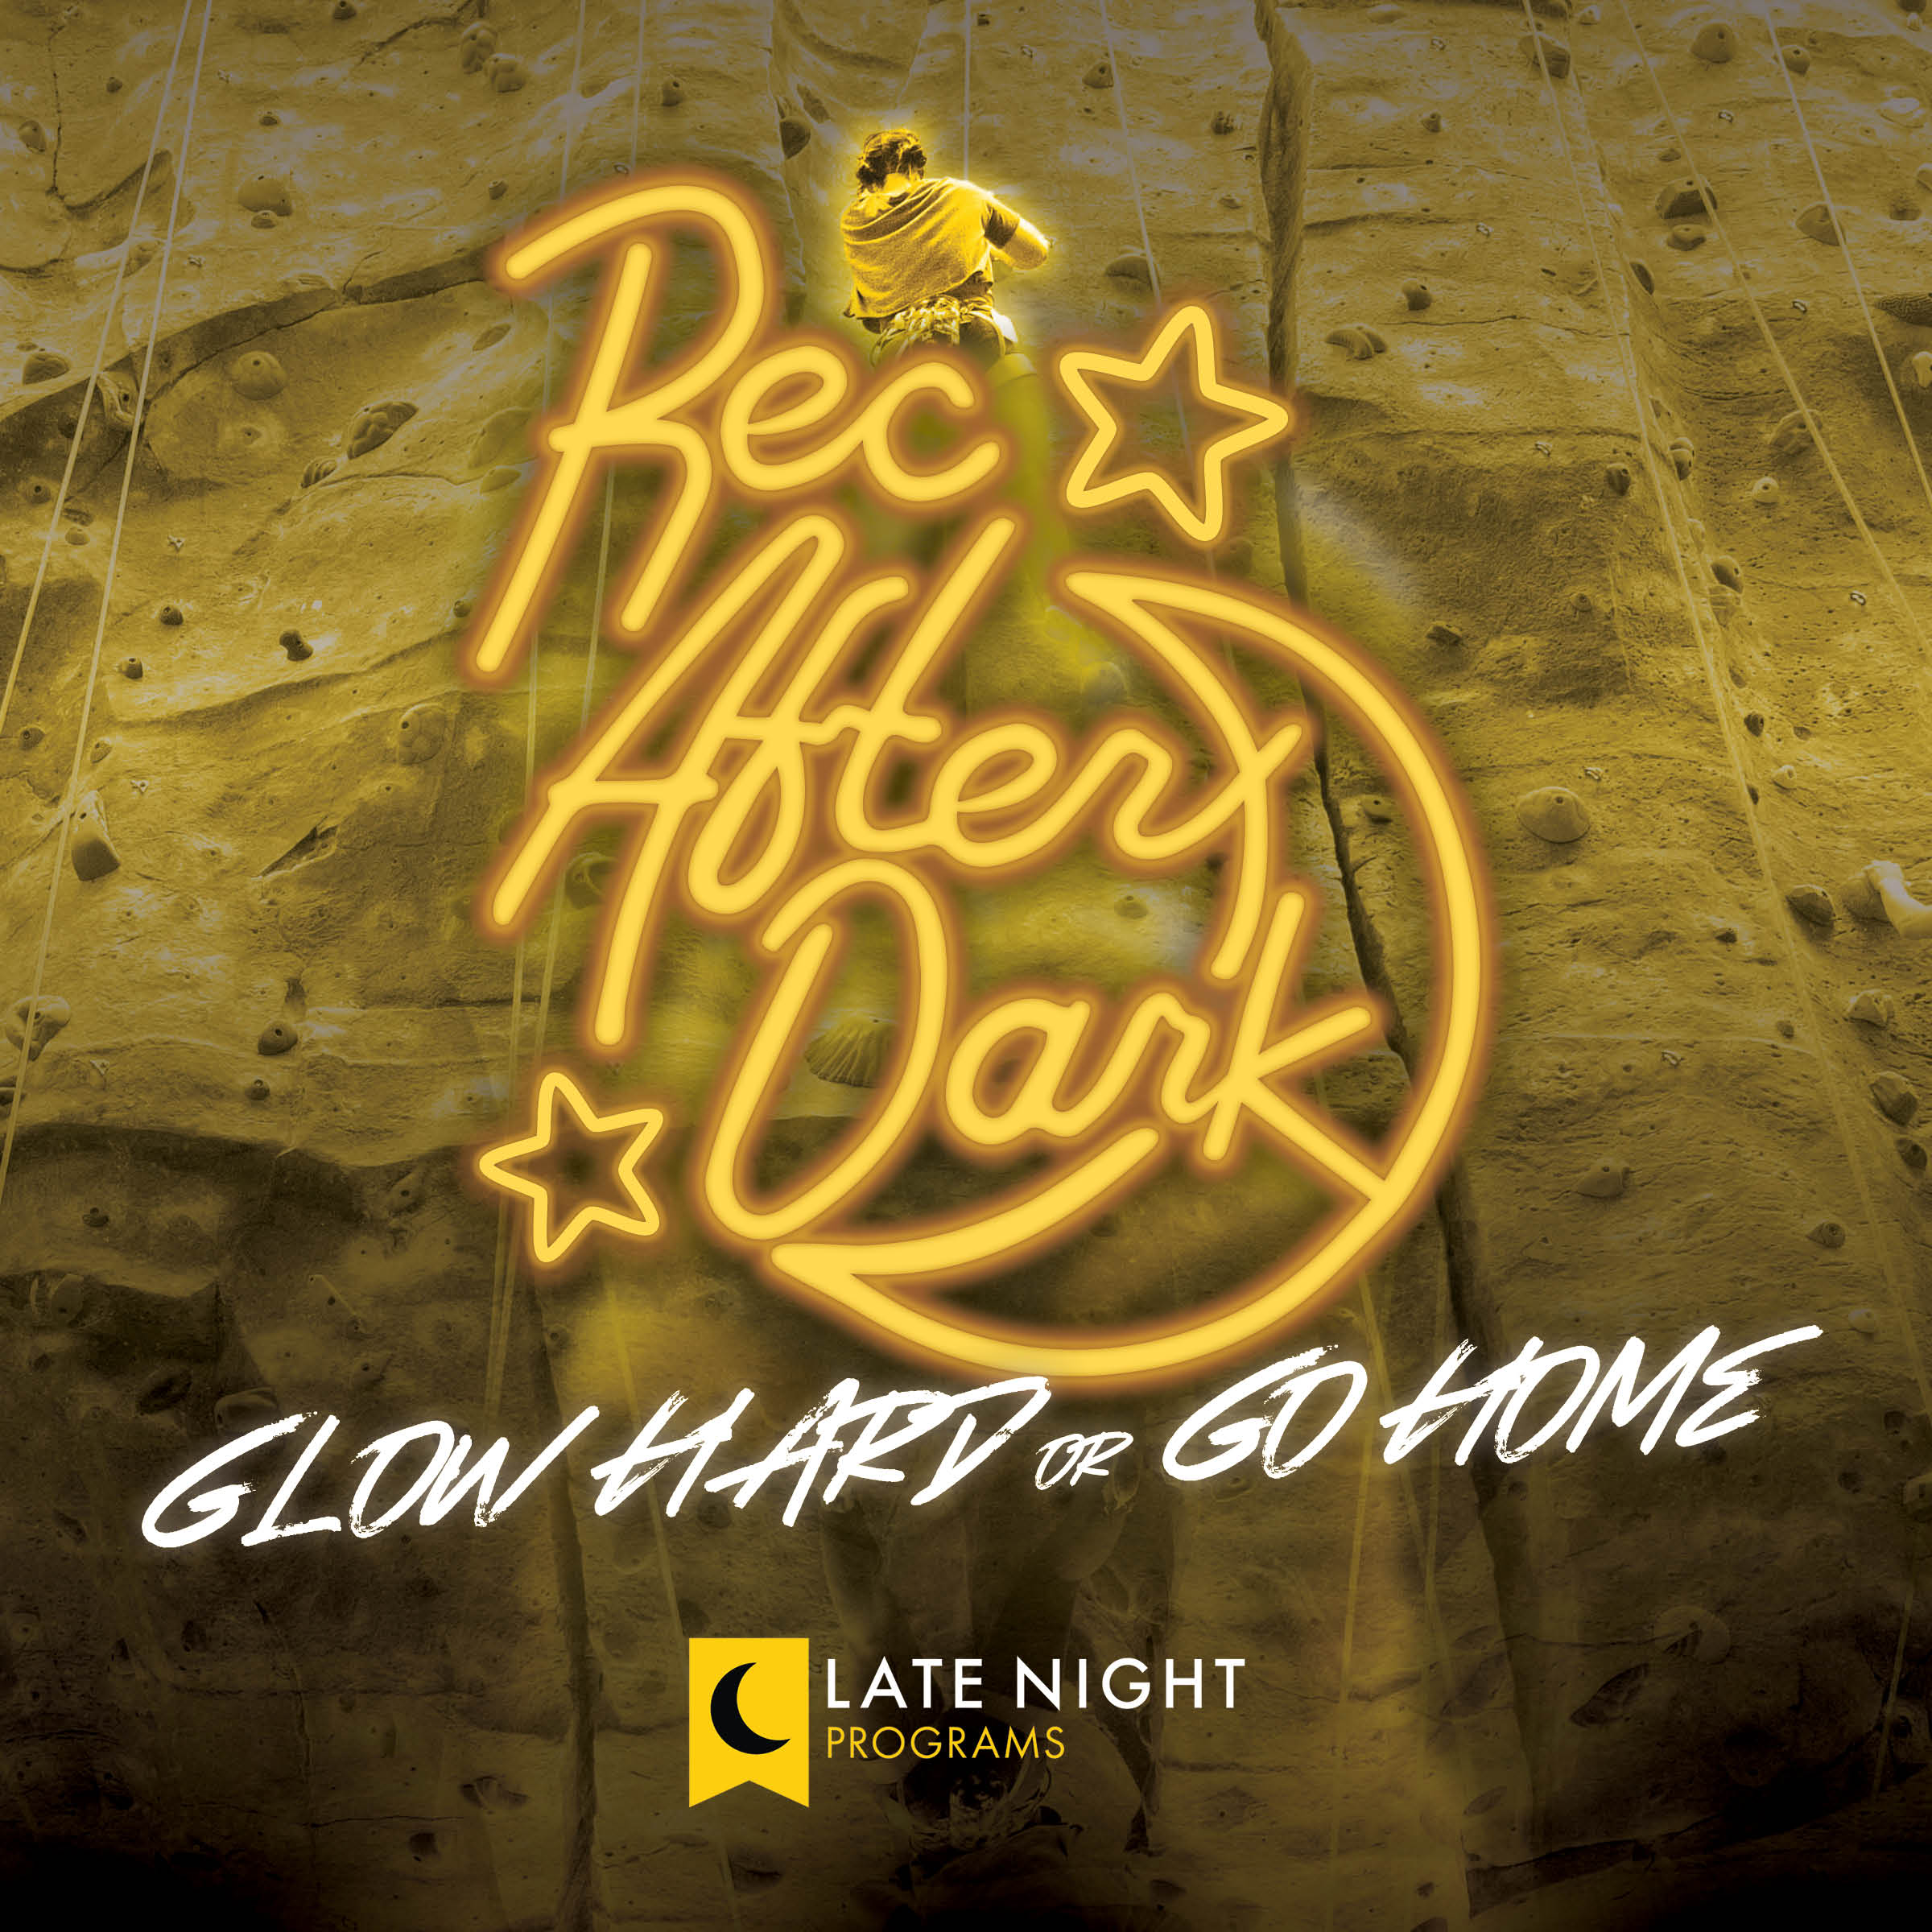 Rec After Dark: Glow Hard or Go Home!